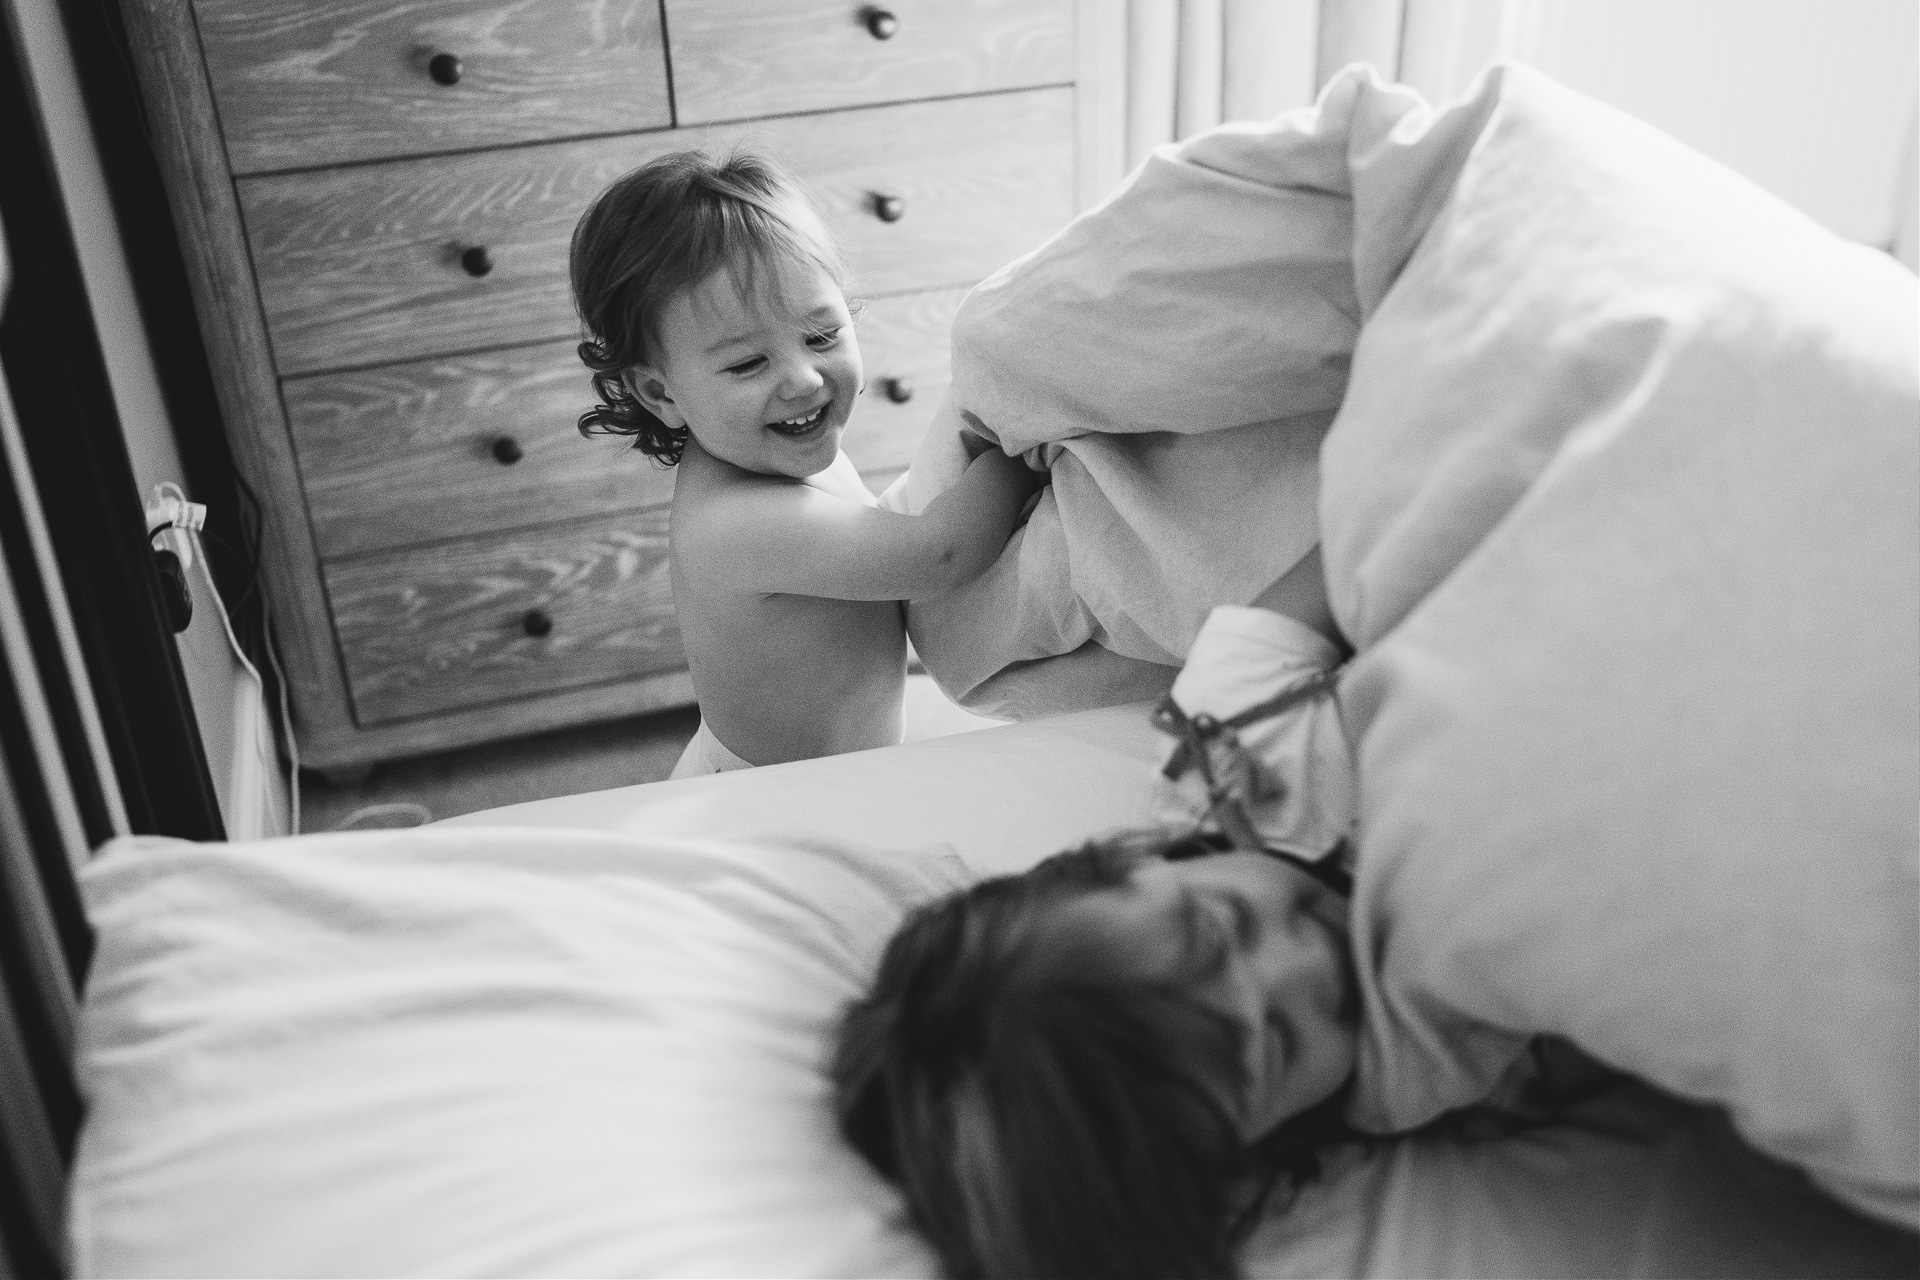 A toddler laughing as she pulls back the duvet cover on her sister